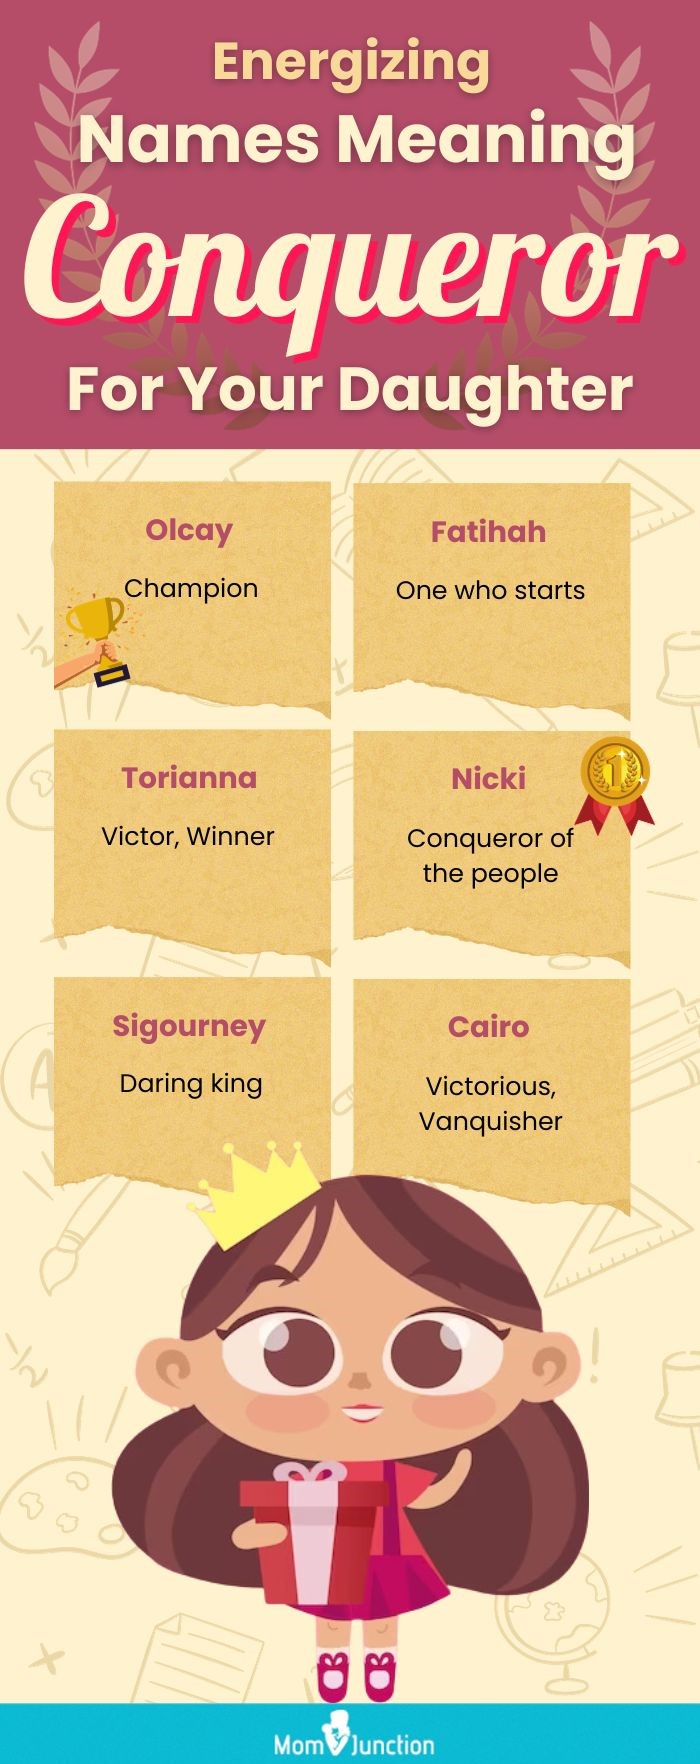 energizing names meaning conqueror for your daughter (infographic)